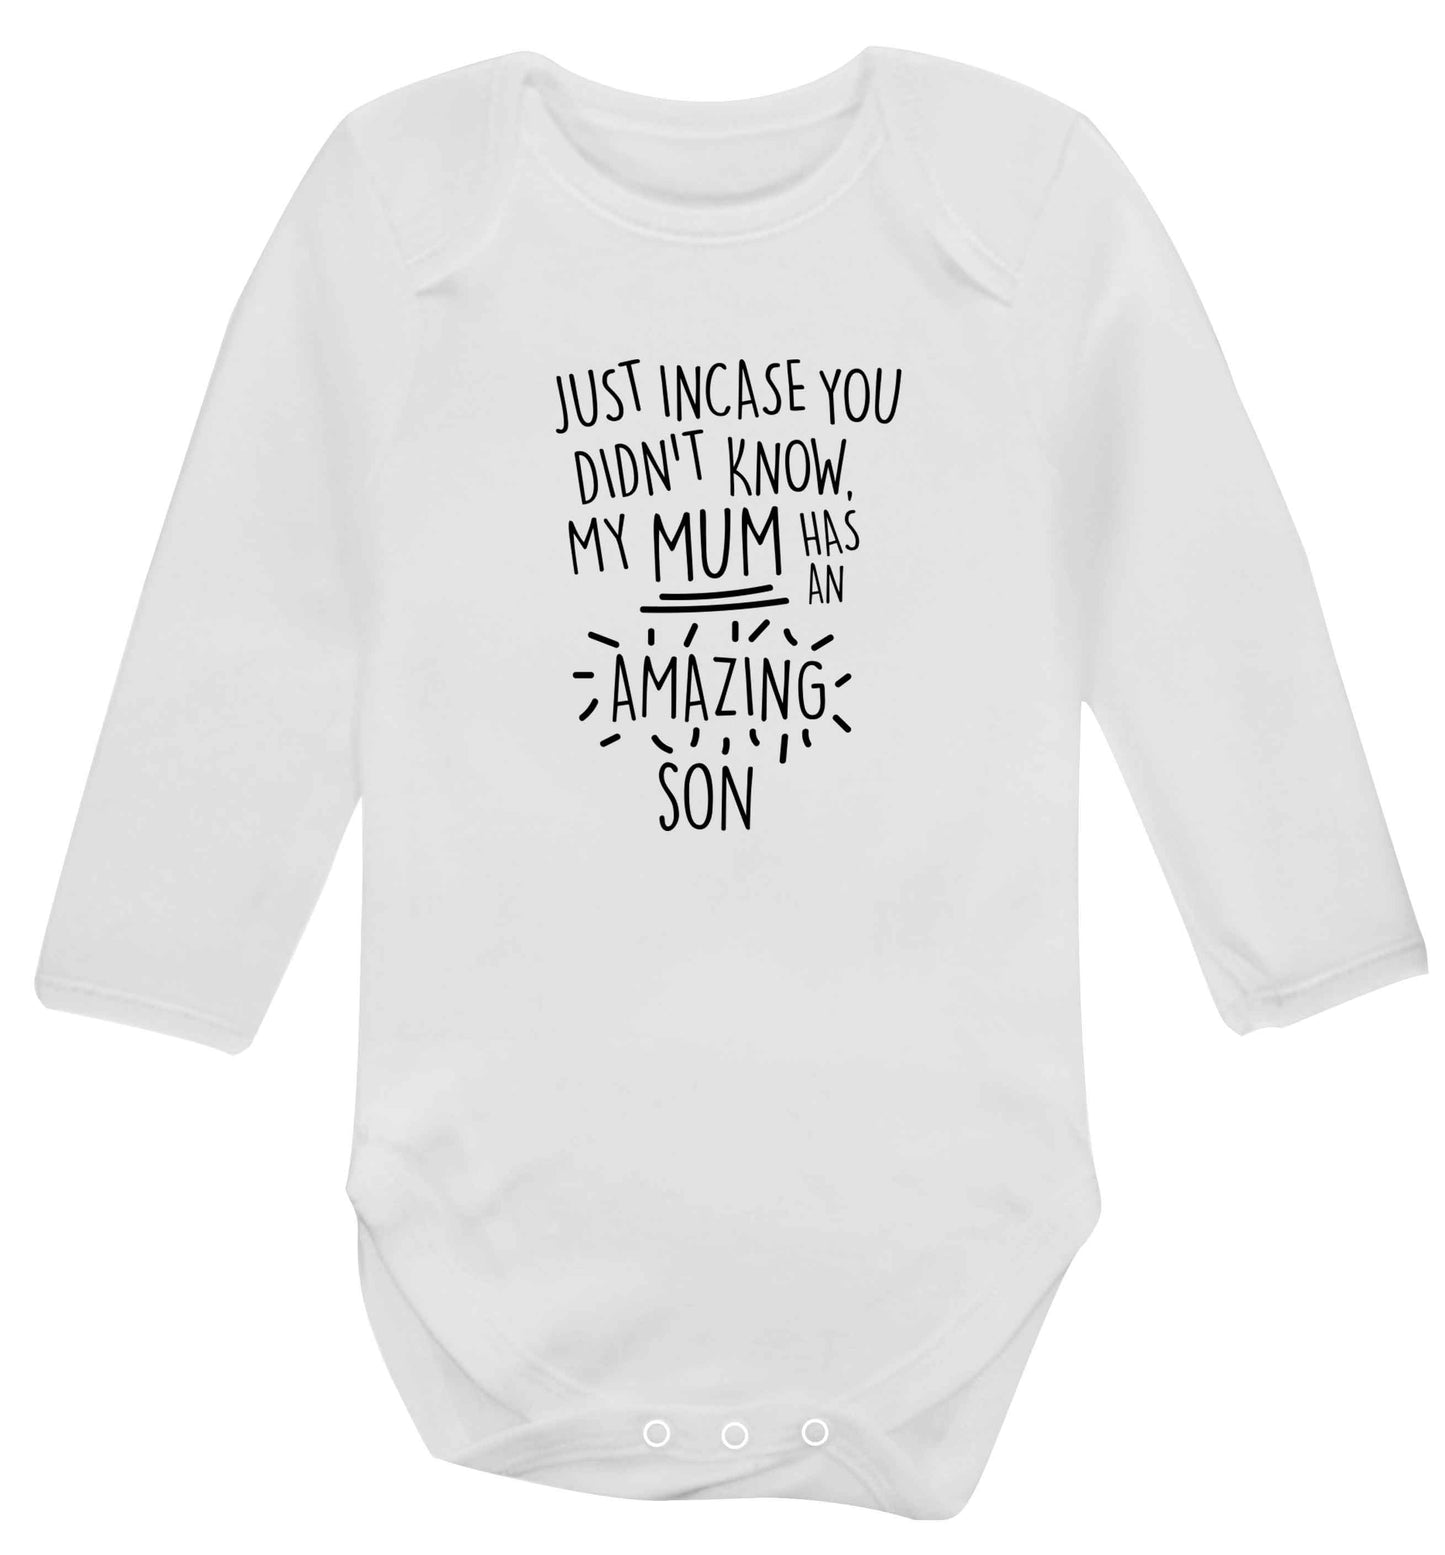 Just incase you didn't know my mum has an amazing son baby vest long sleeved white 6-12 months